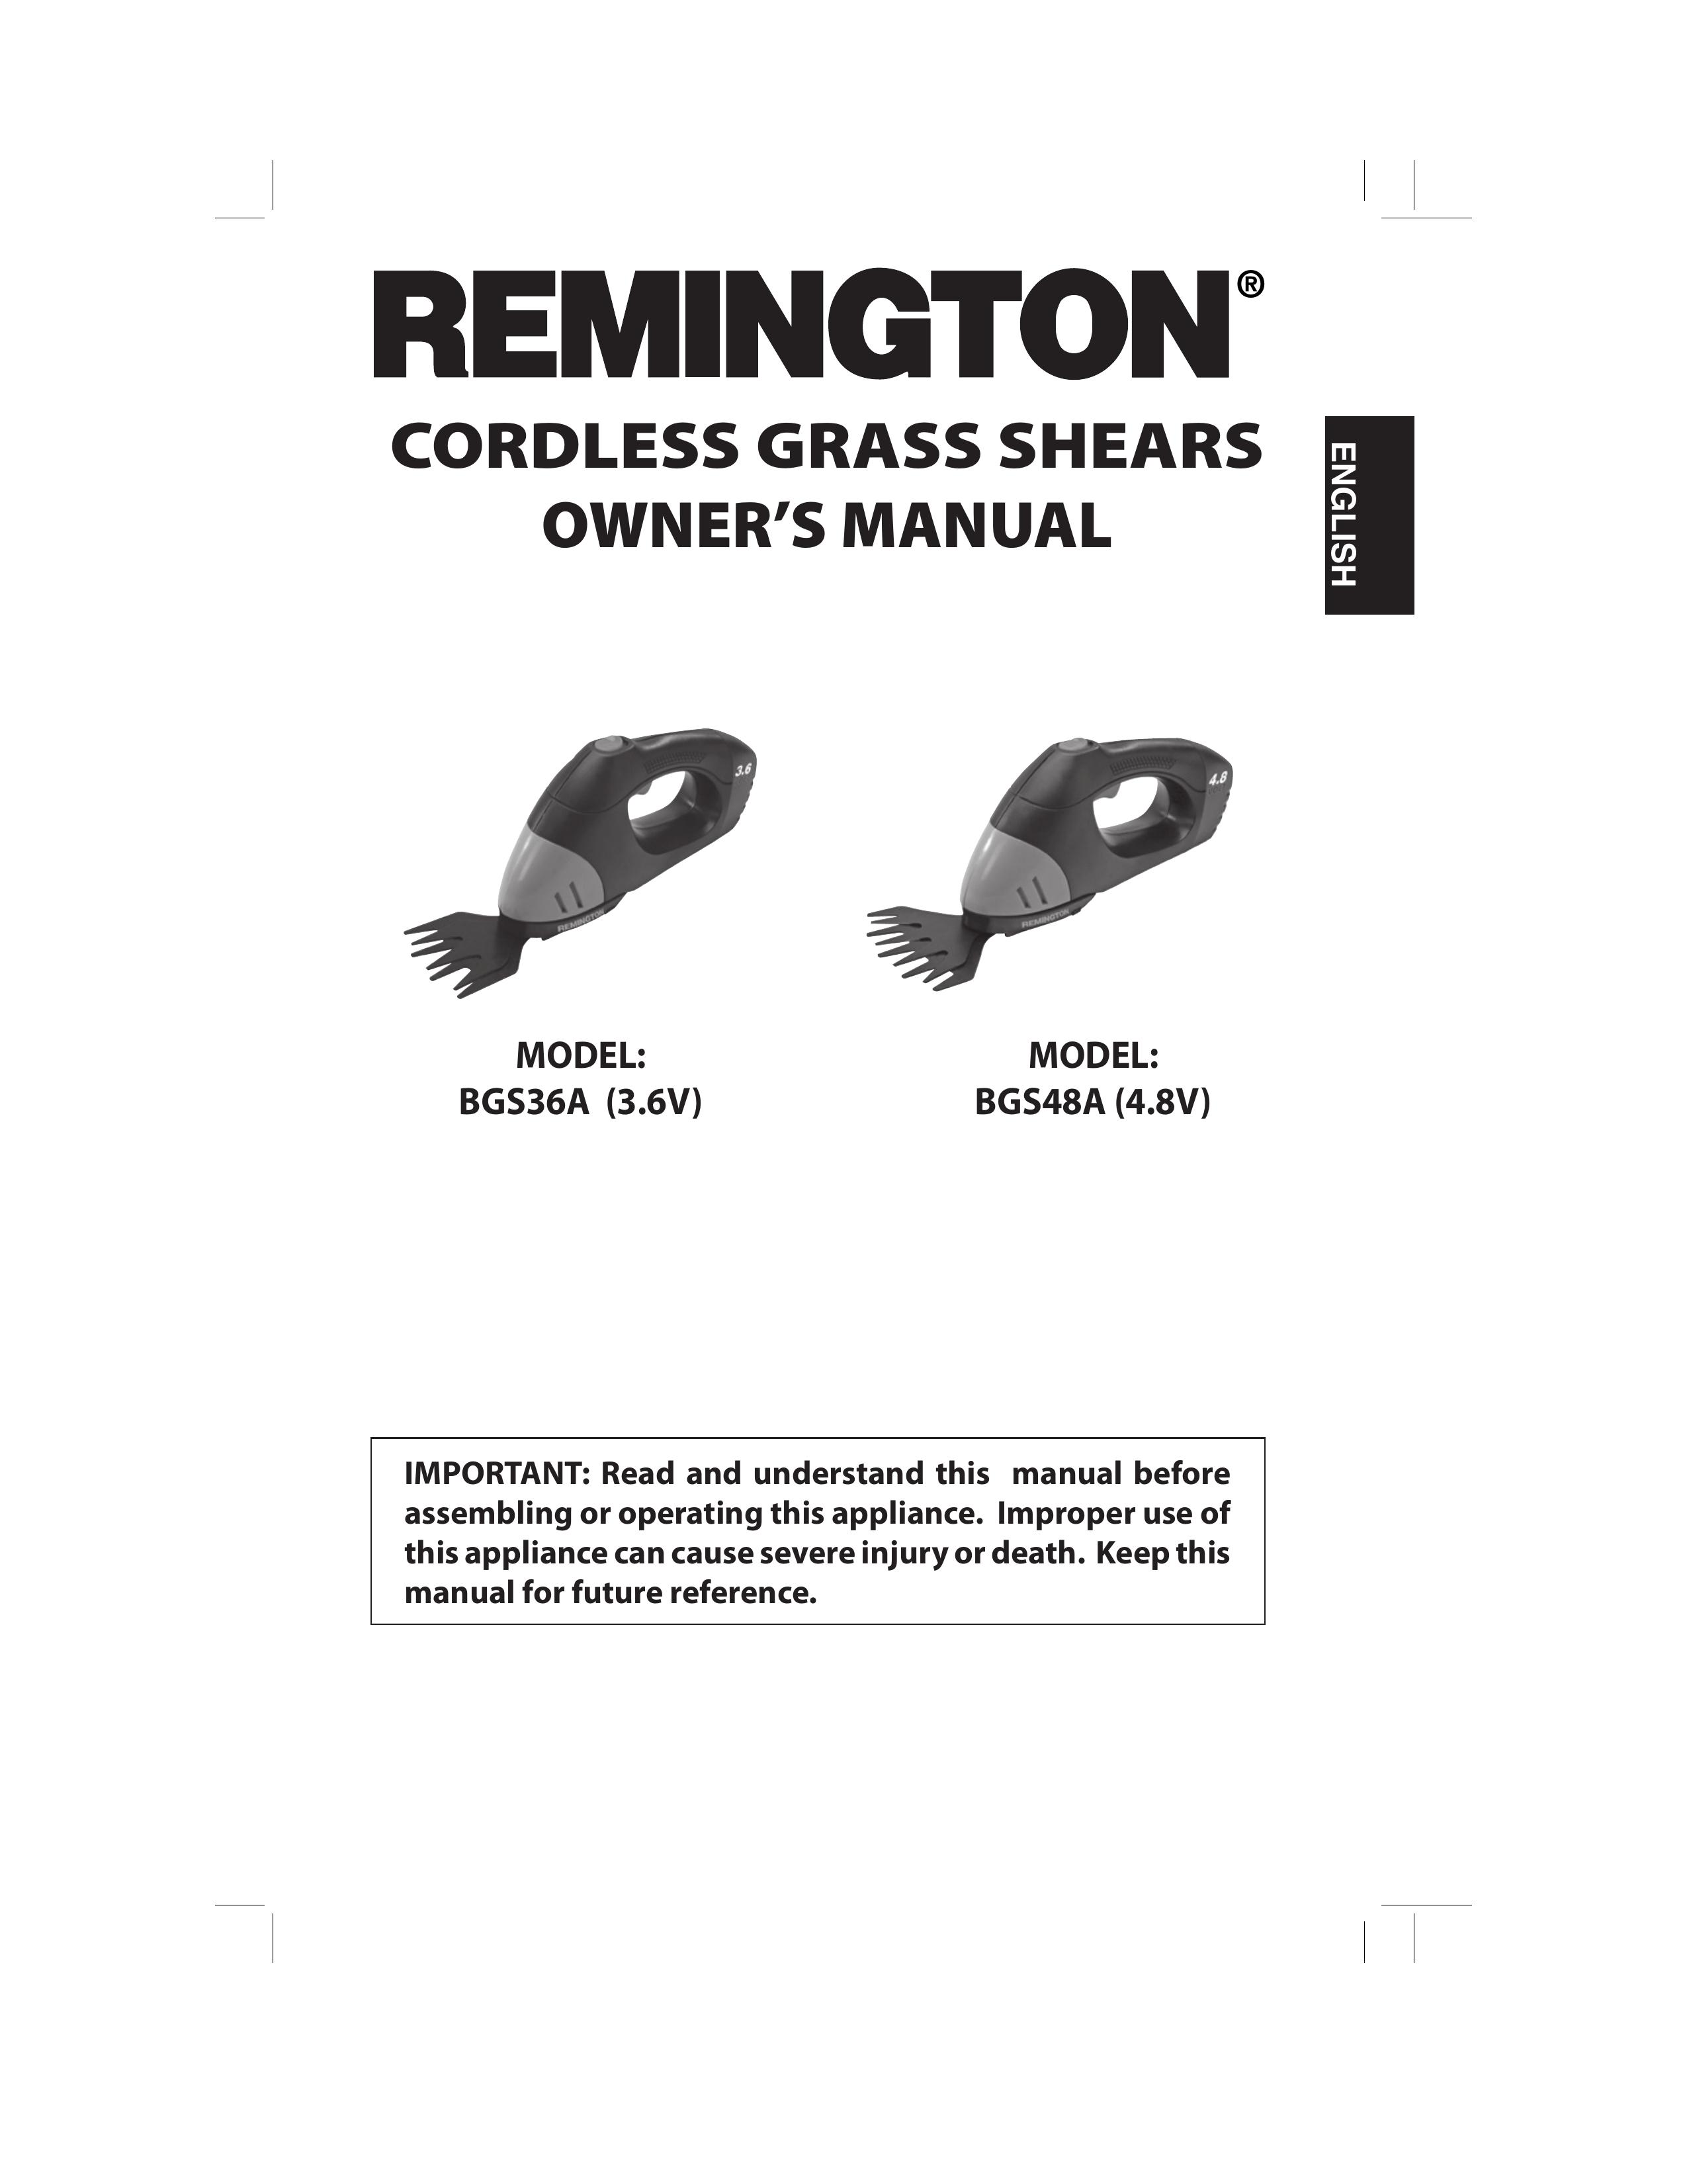 Remington Power Tools BGS48A Trimmer User Manual